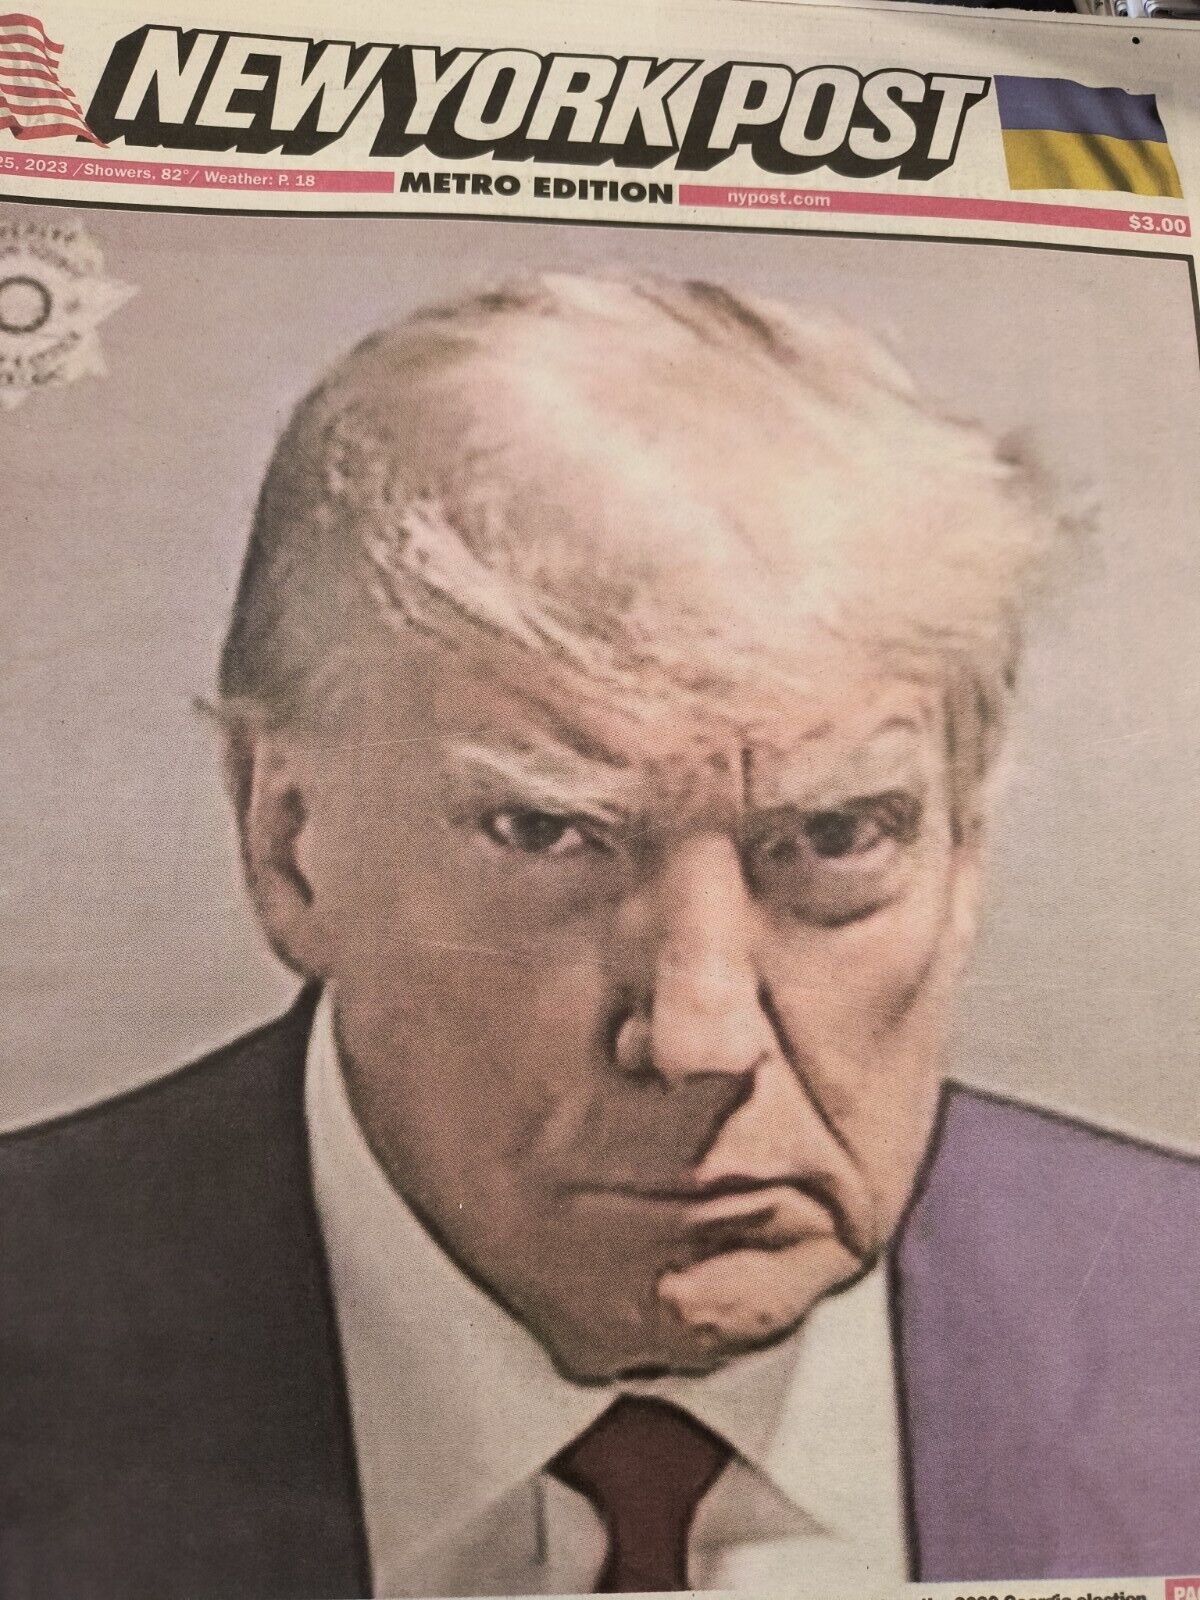 The New York Post Friday August 25 2023 Trump Mugged